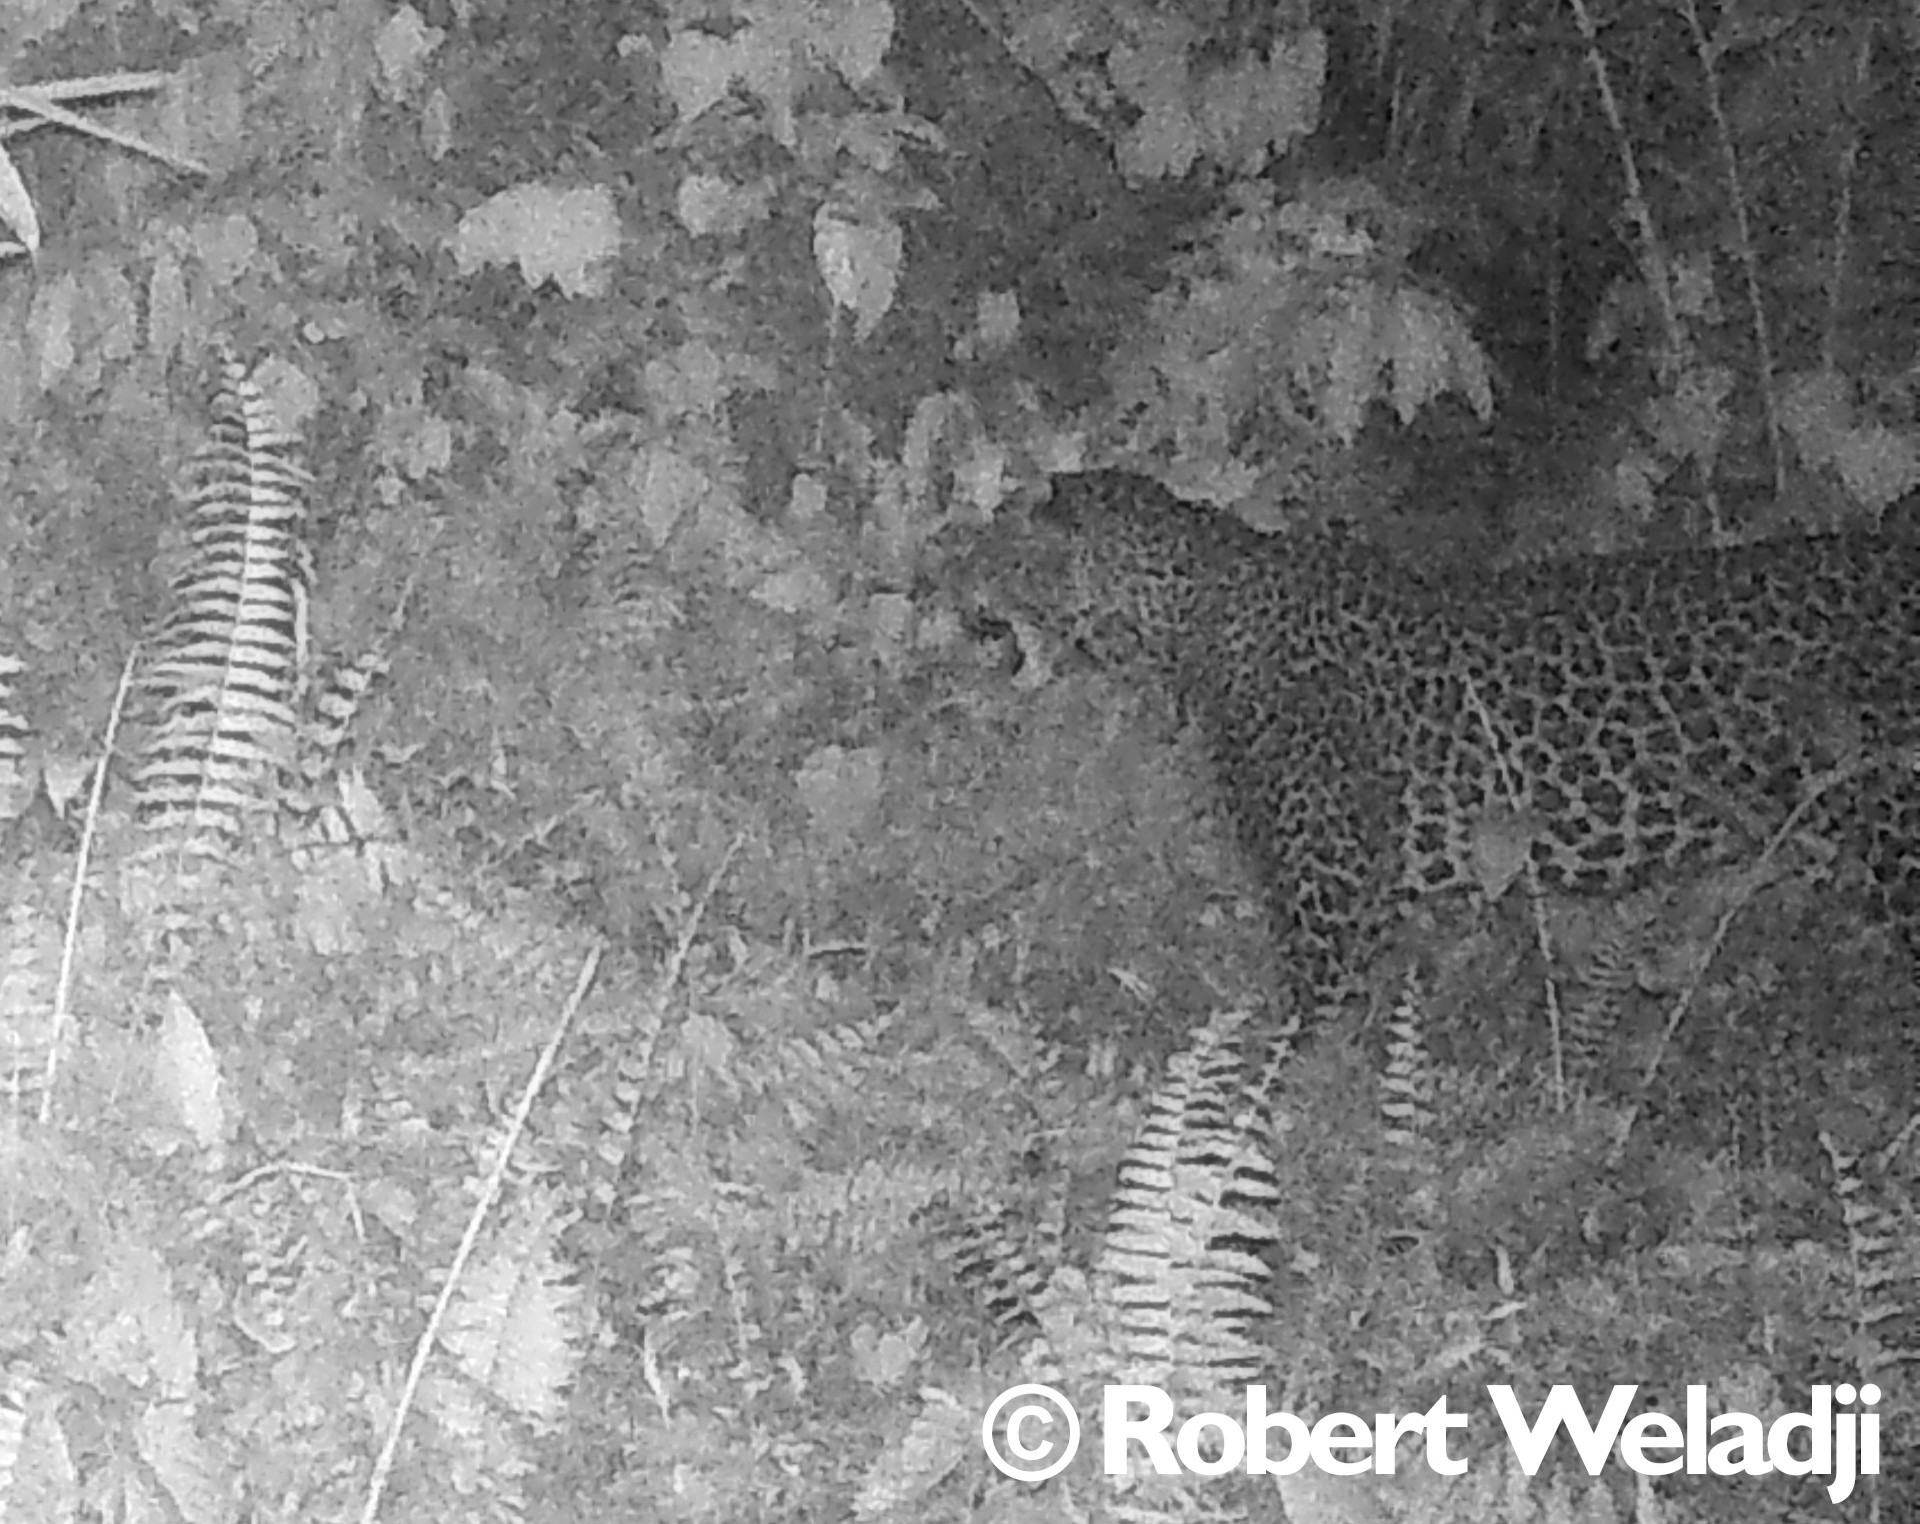 African leopard photographed in Cameroon